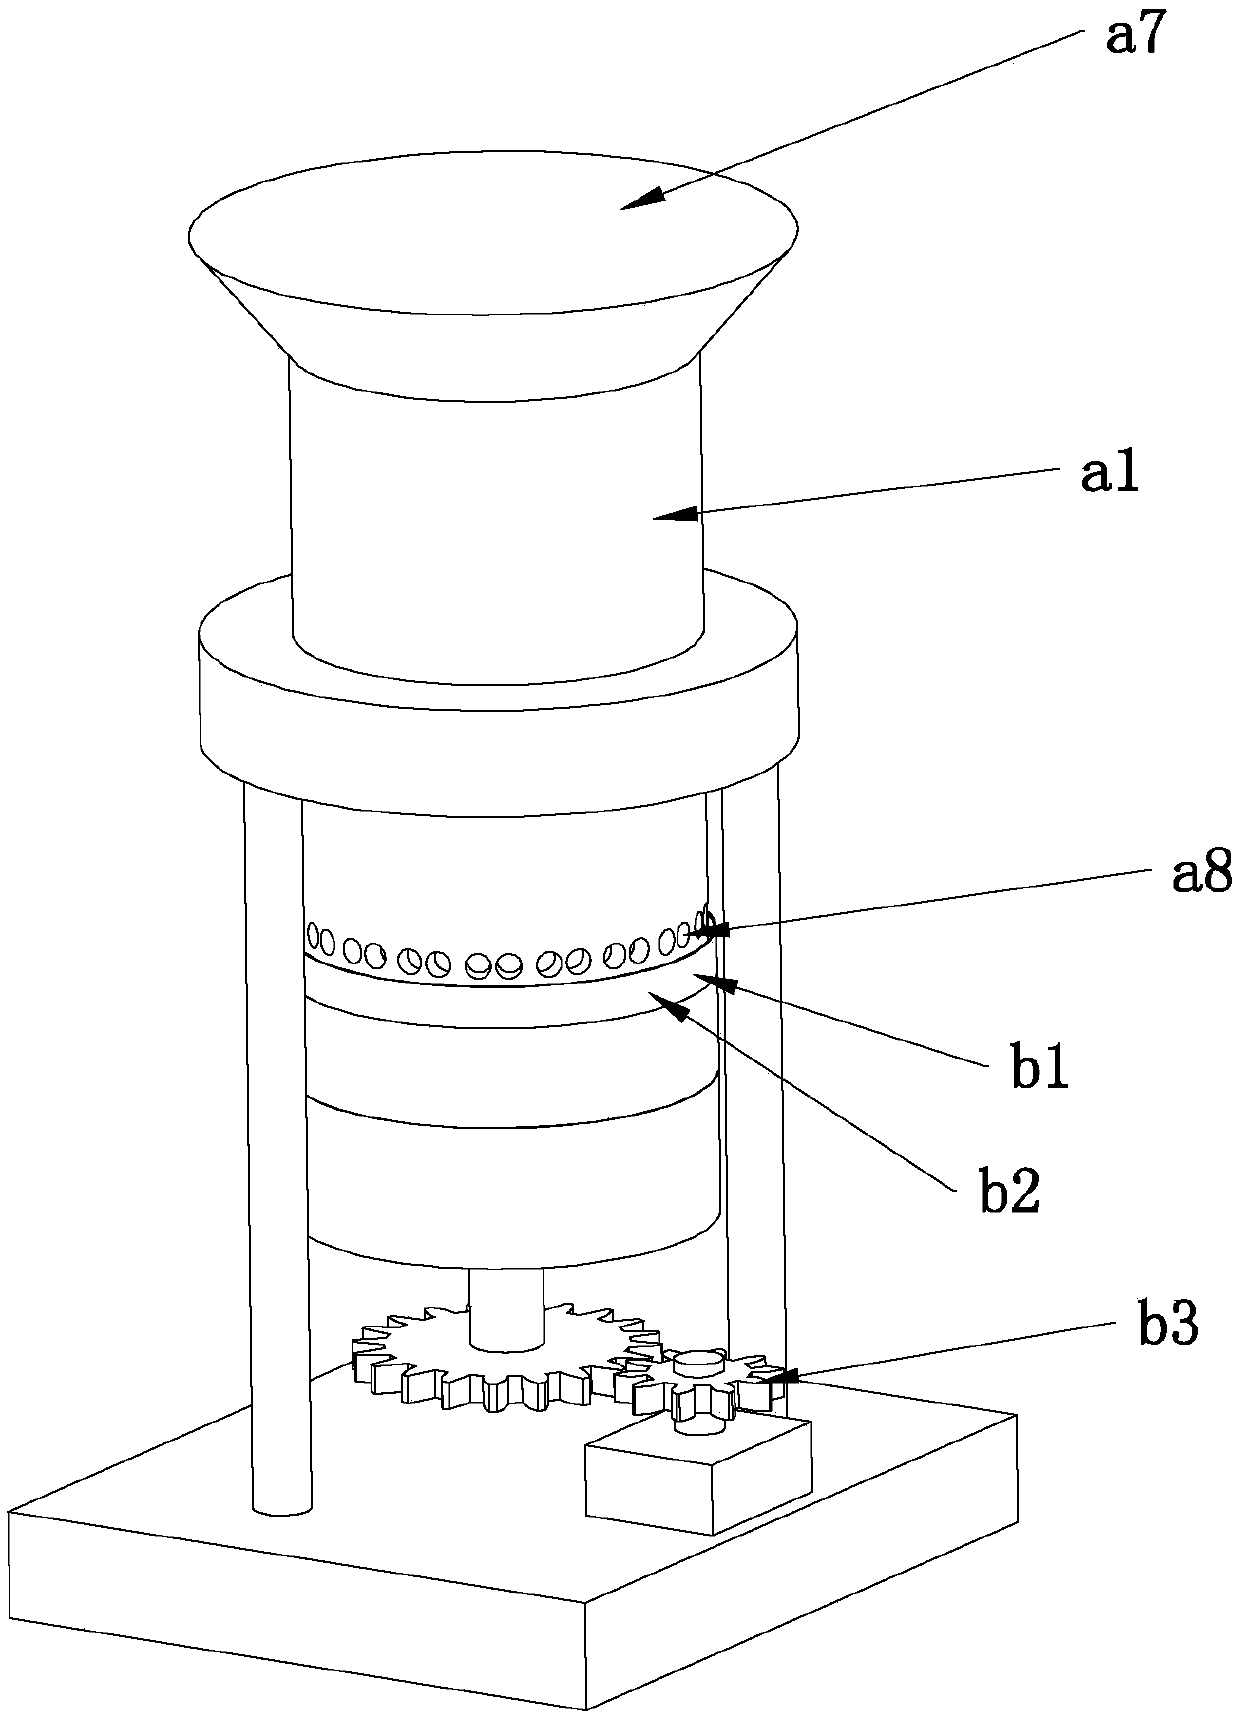 Corn straw briquetting device for evenly cutting materials